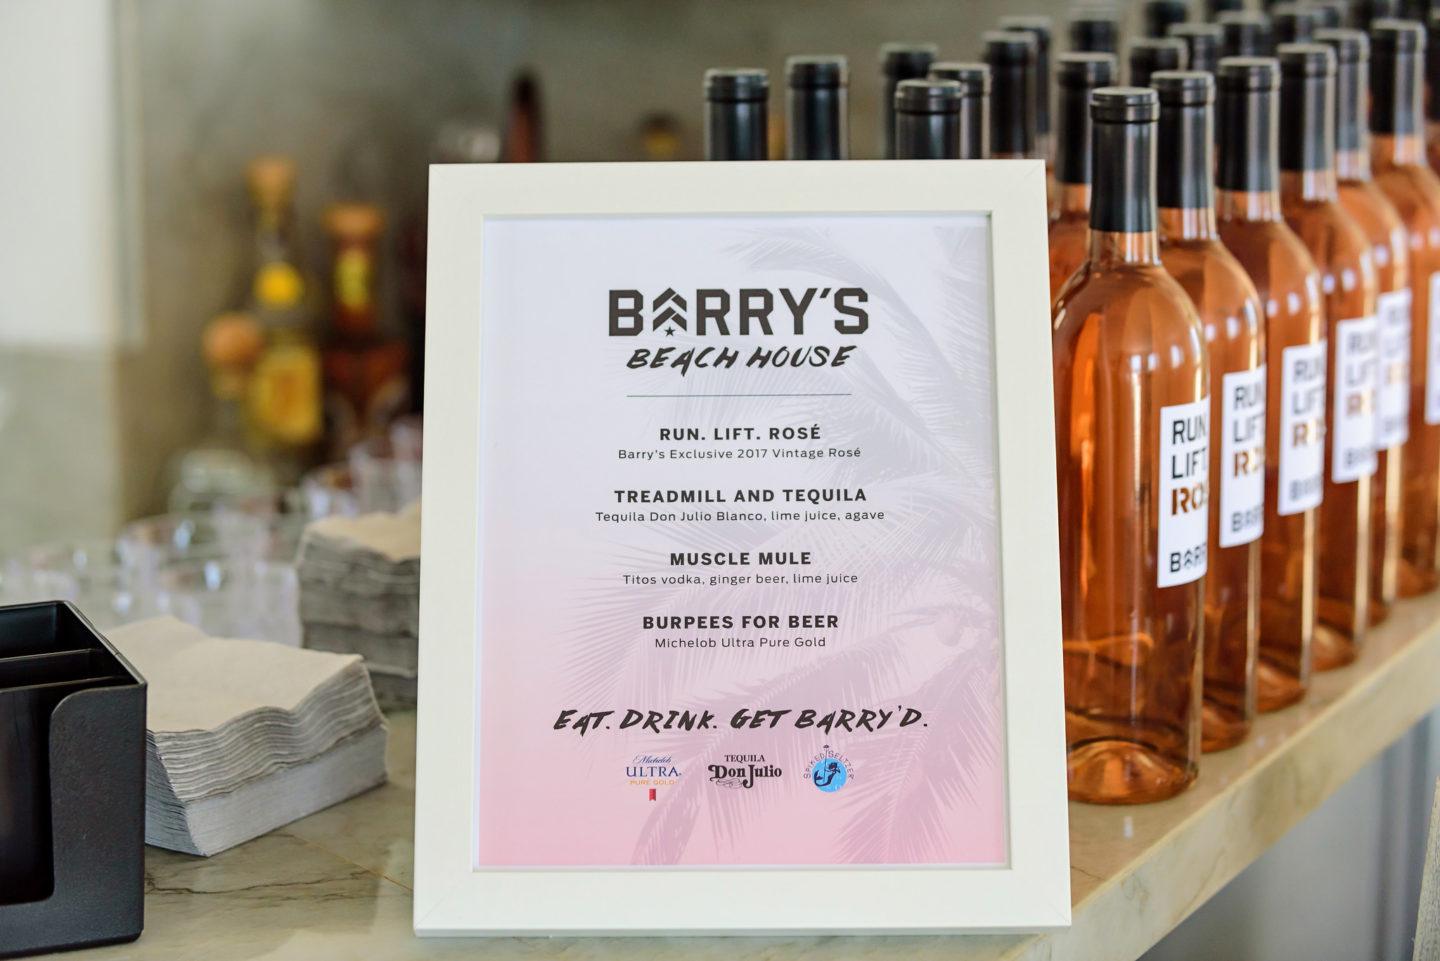 Barry's Beach House drink menu in front of bottles of Run Lift Rosé